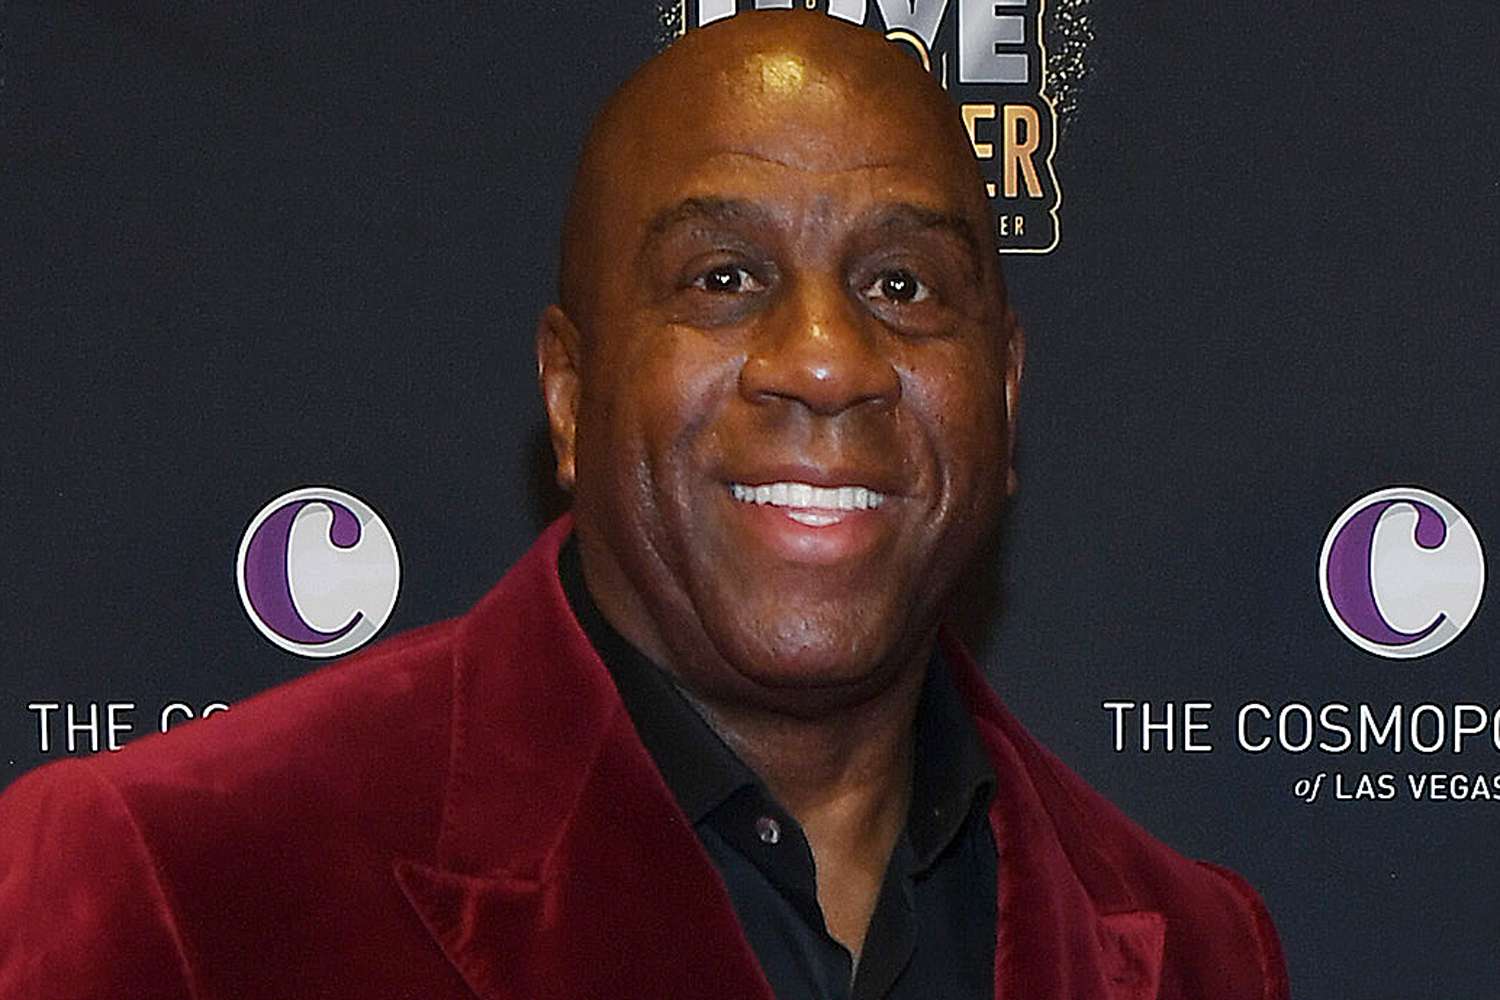 Magic Johnson Details How He’s Defied The Odds Since 1991 HIV Diagnosis: 'I’ve Done My Part' (Exclusive)